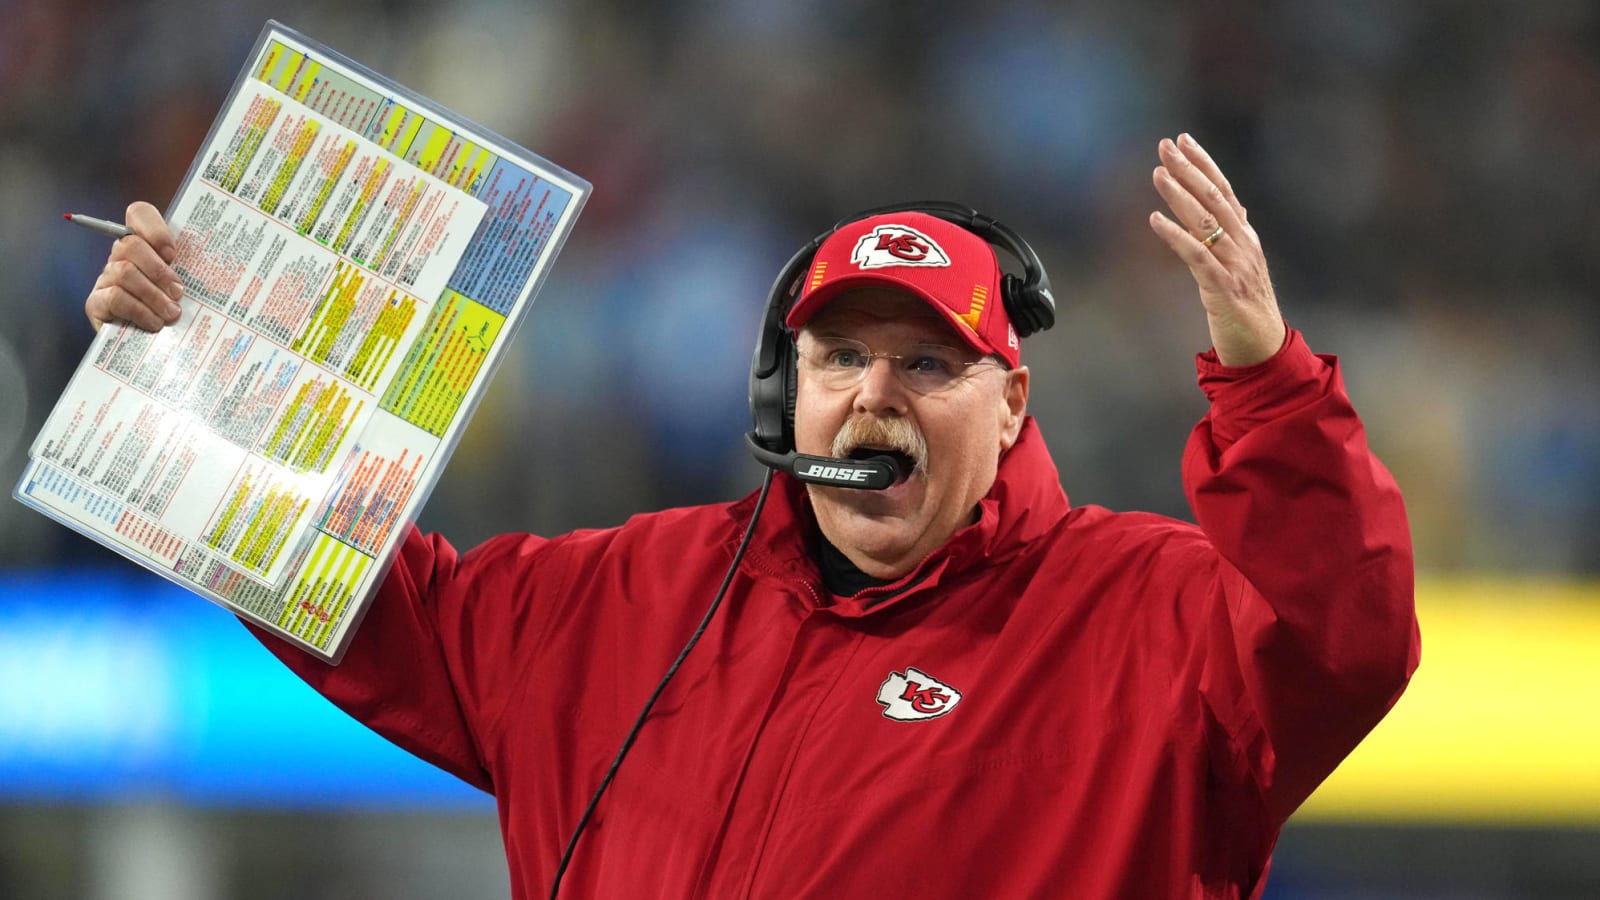 Andy Reid had great comment about Travis Kelce's walk-off TD